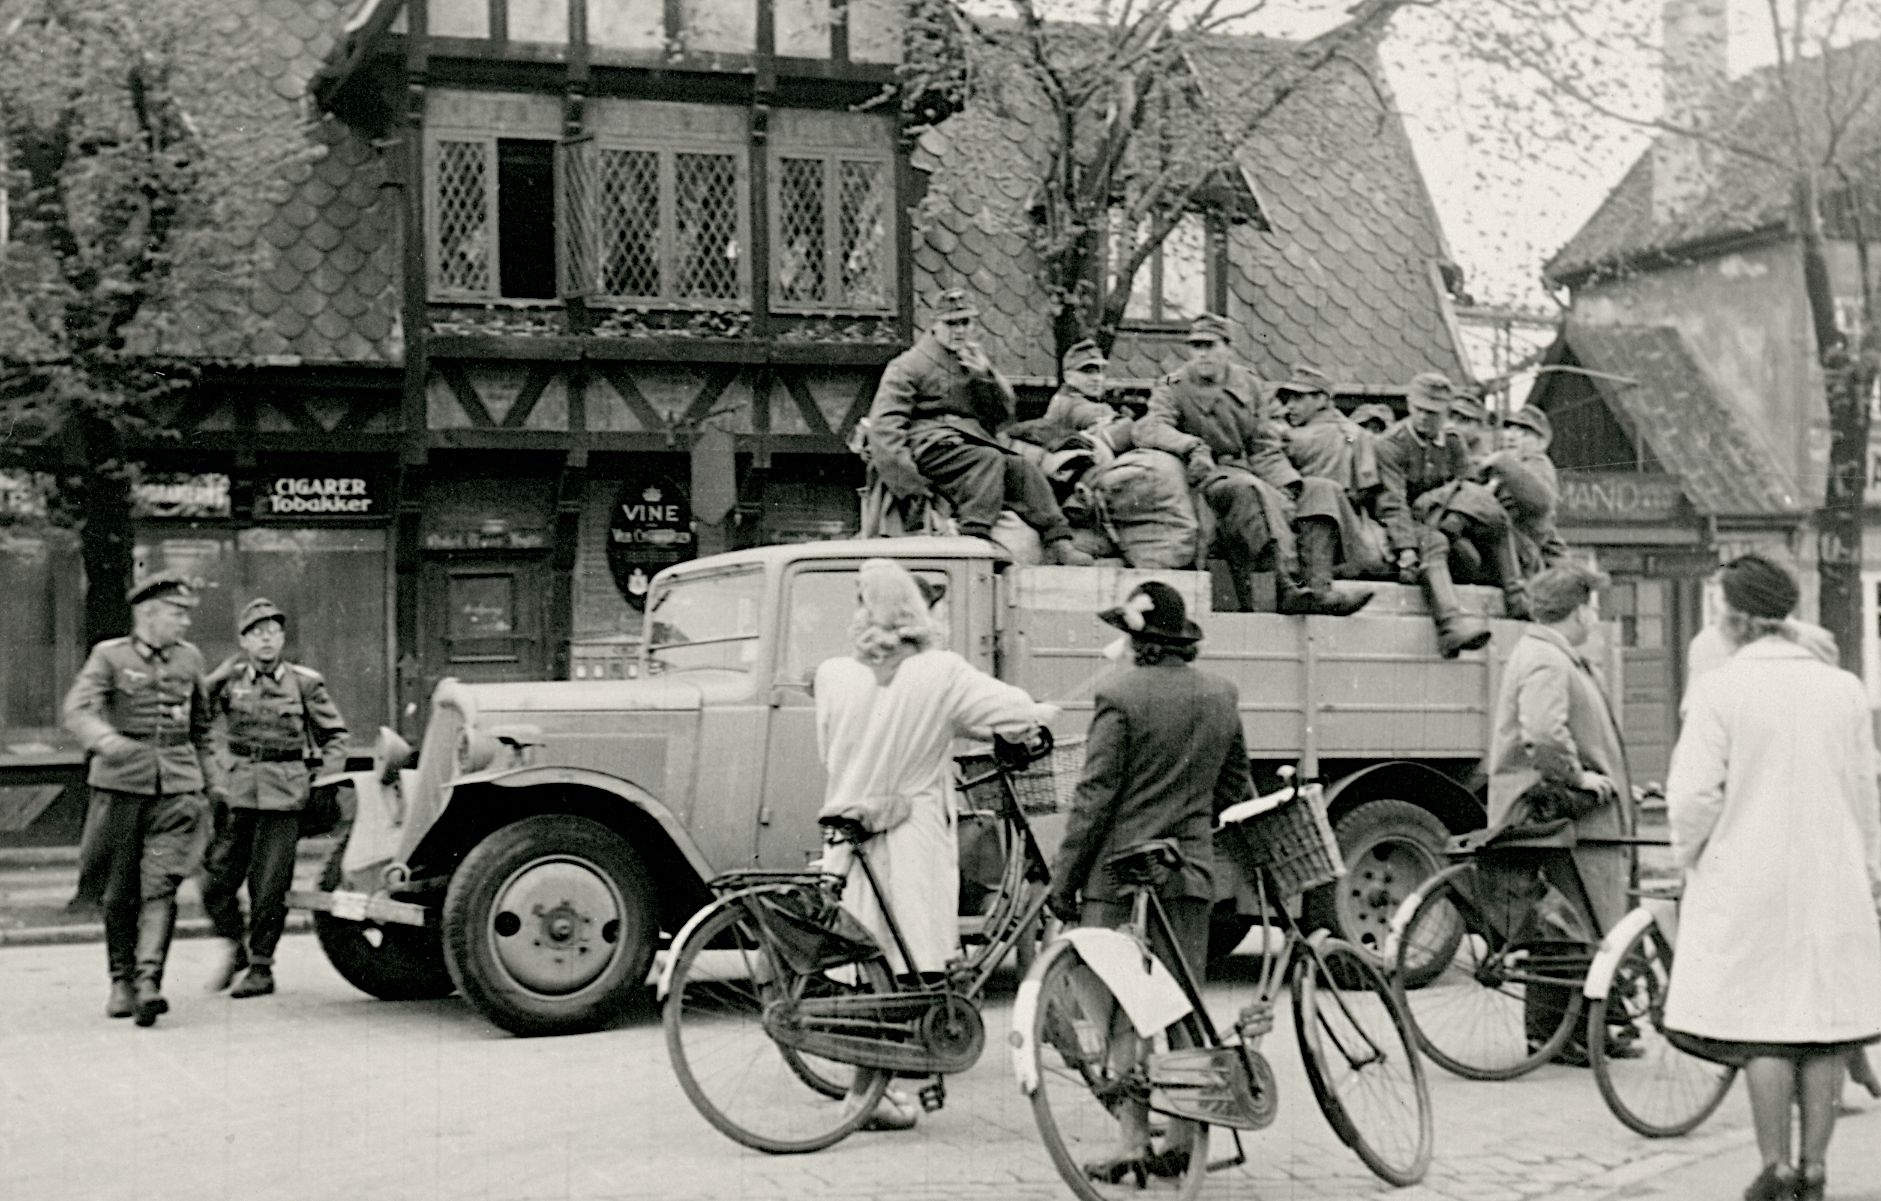 Women on bikes and Nazi soldiers. Photo courtesy of the Museum of Danish Resistance.